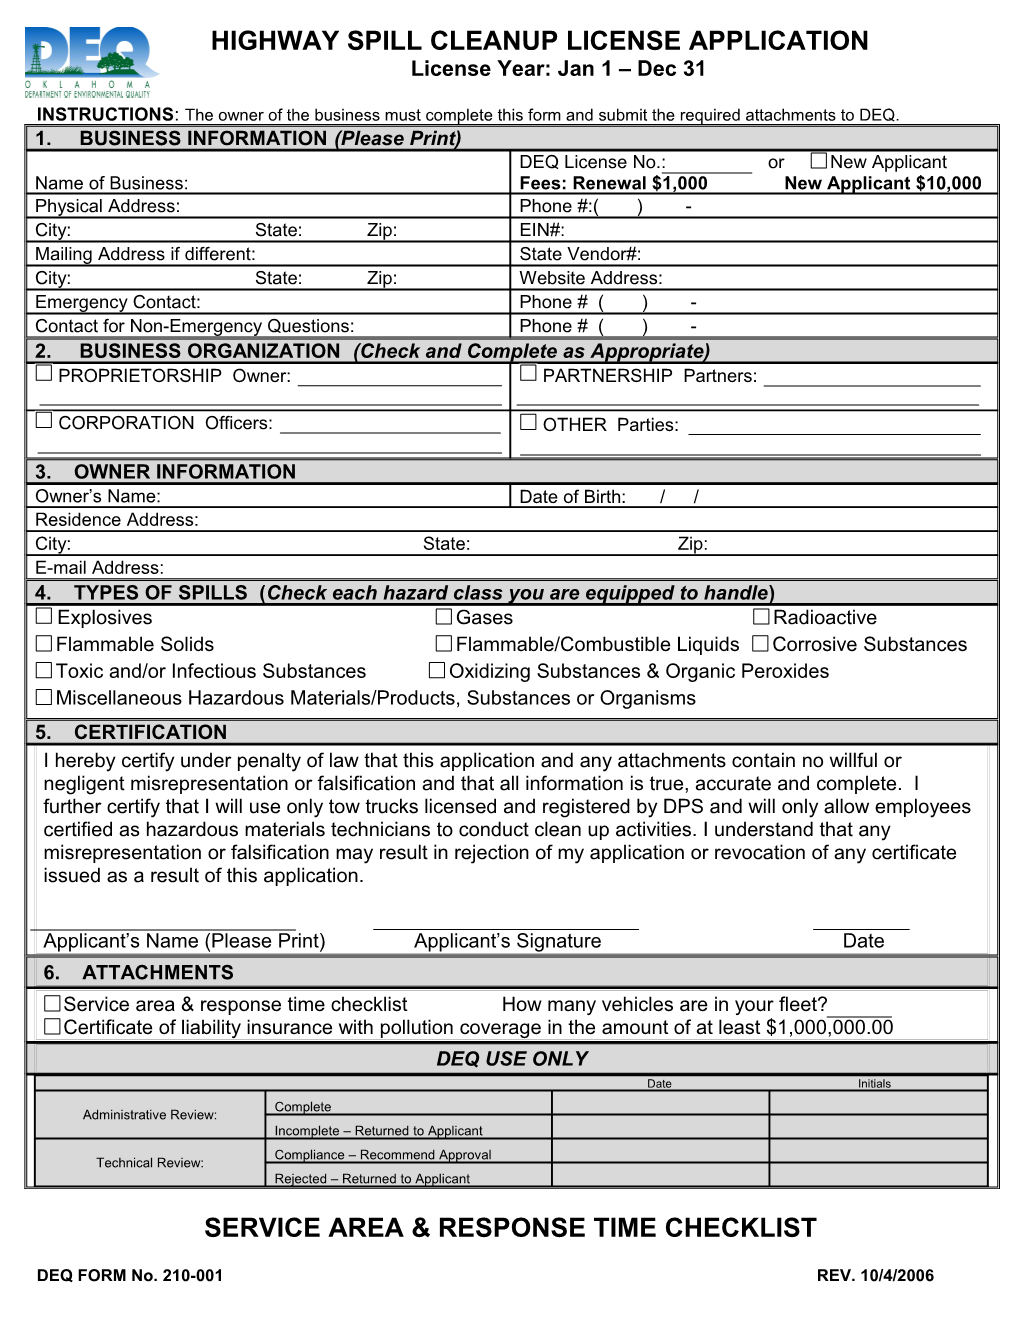 Application for Septic Tank Cleaner License and Vehicle Registration